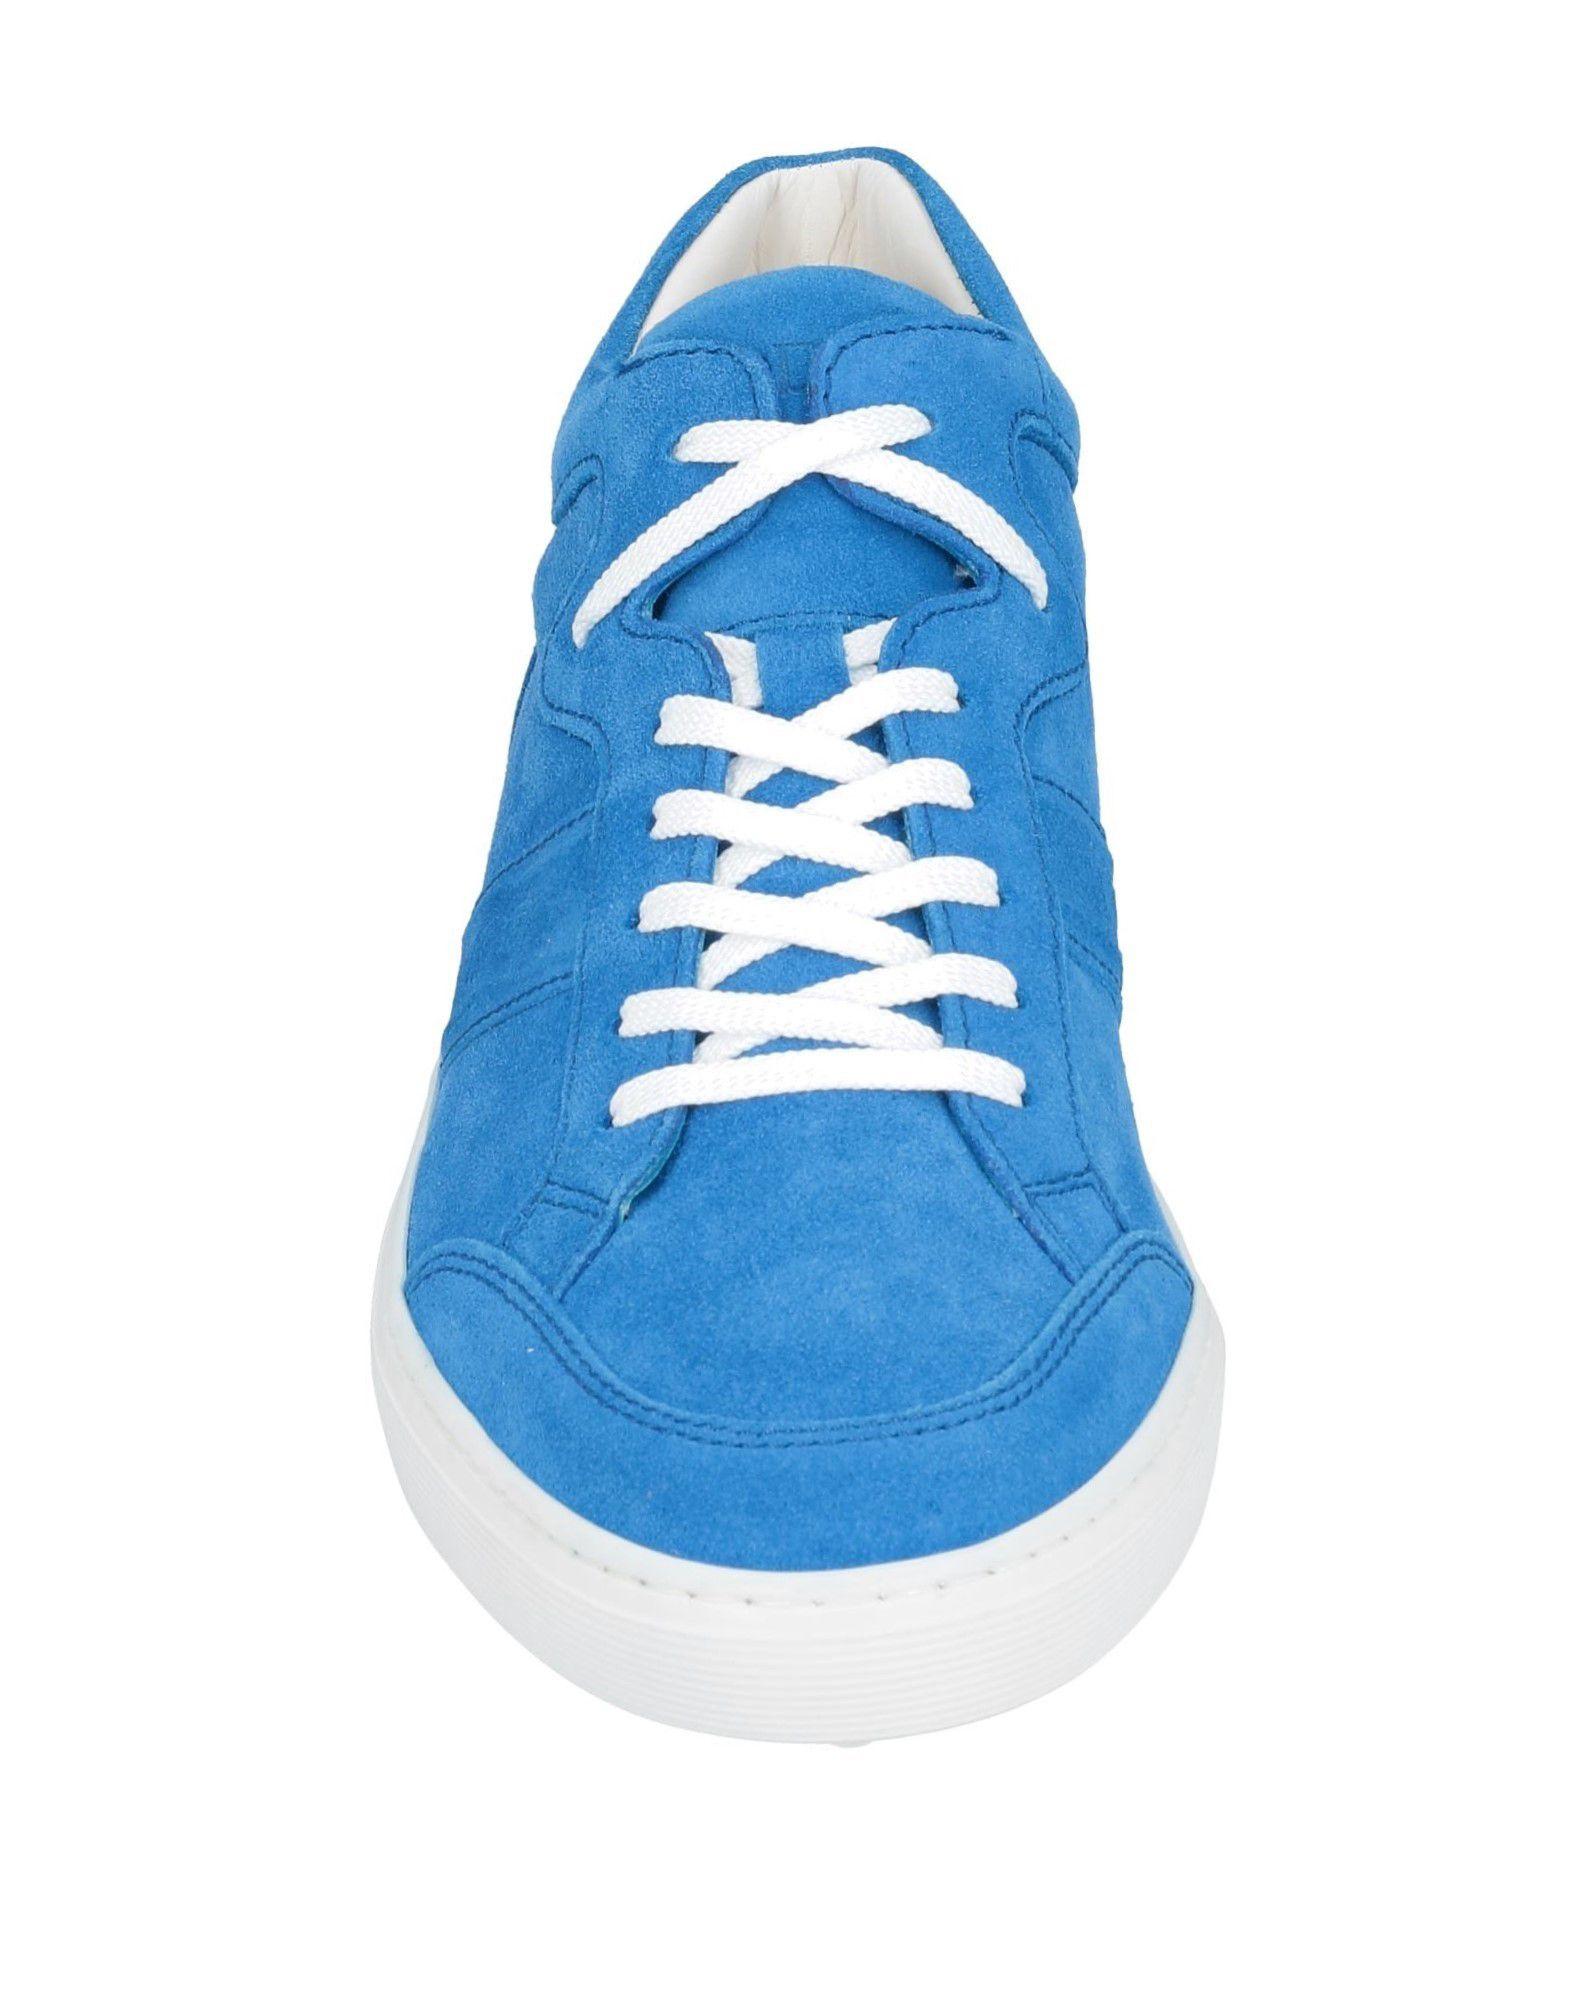 Tod's Leather Low-tops & Sneakers in Pastel Blue (Blue) for Men - Lyst